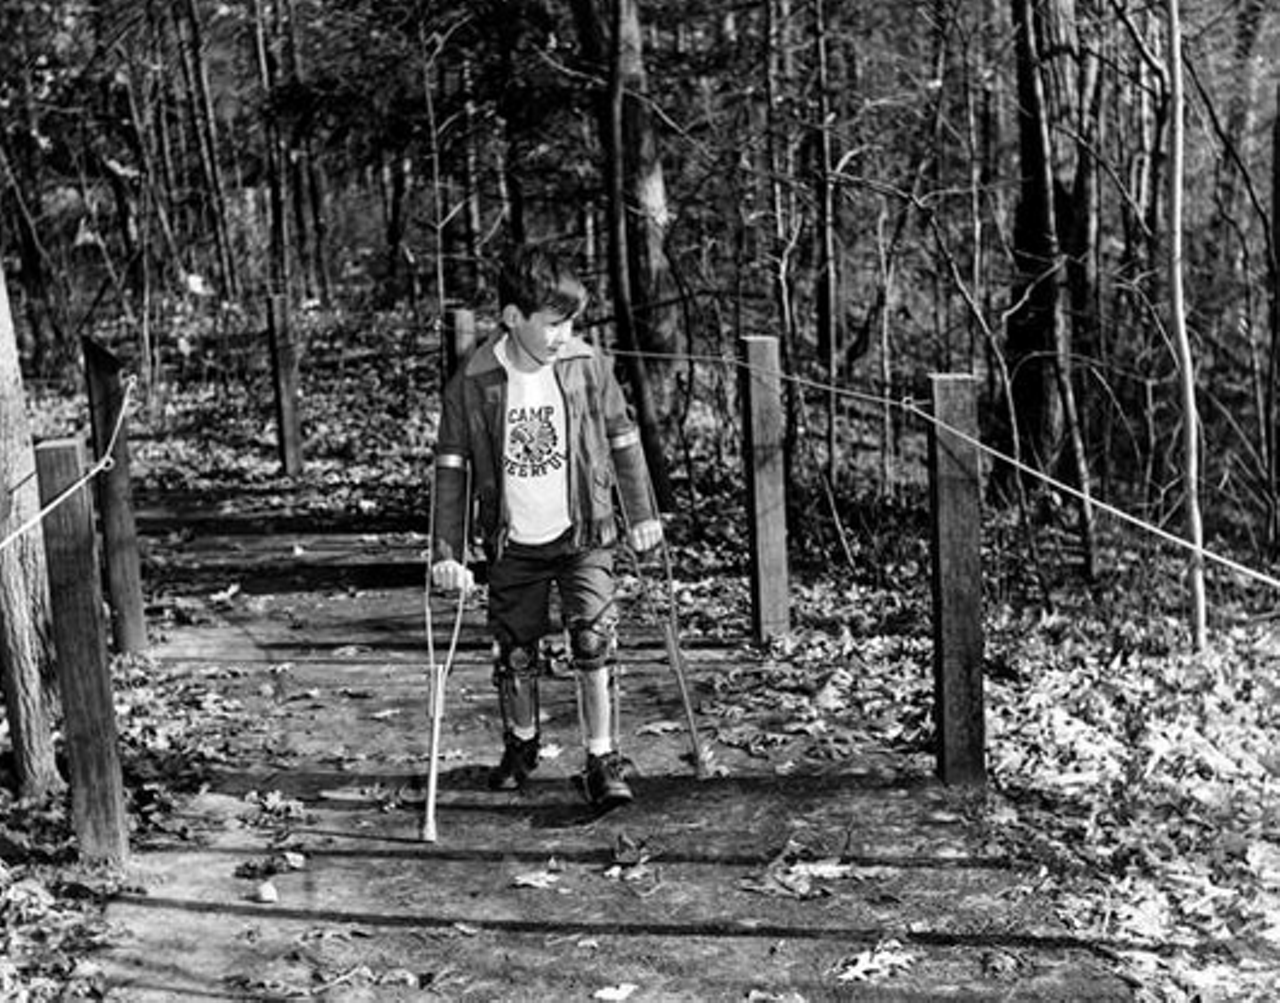 Taking a walk on the Camp Cheerful nature trail, 1975